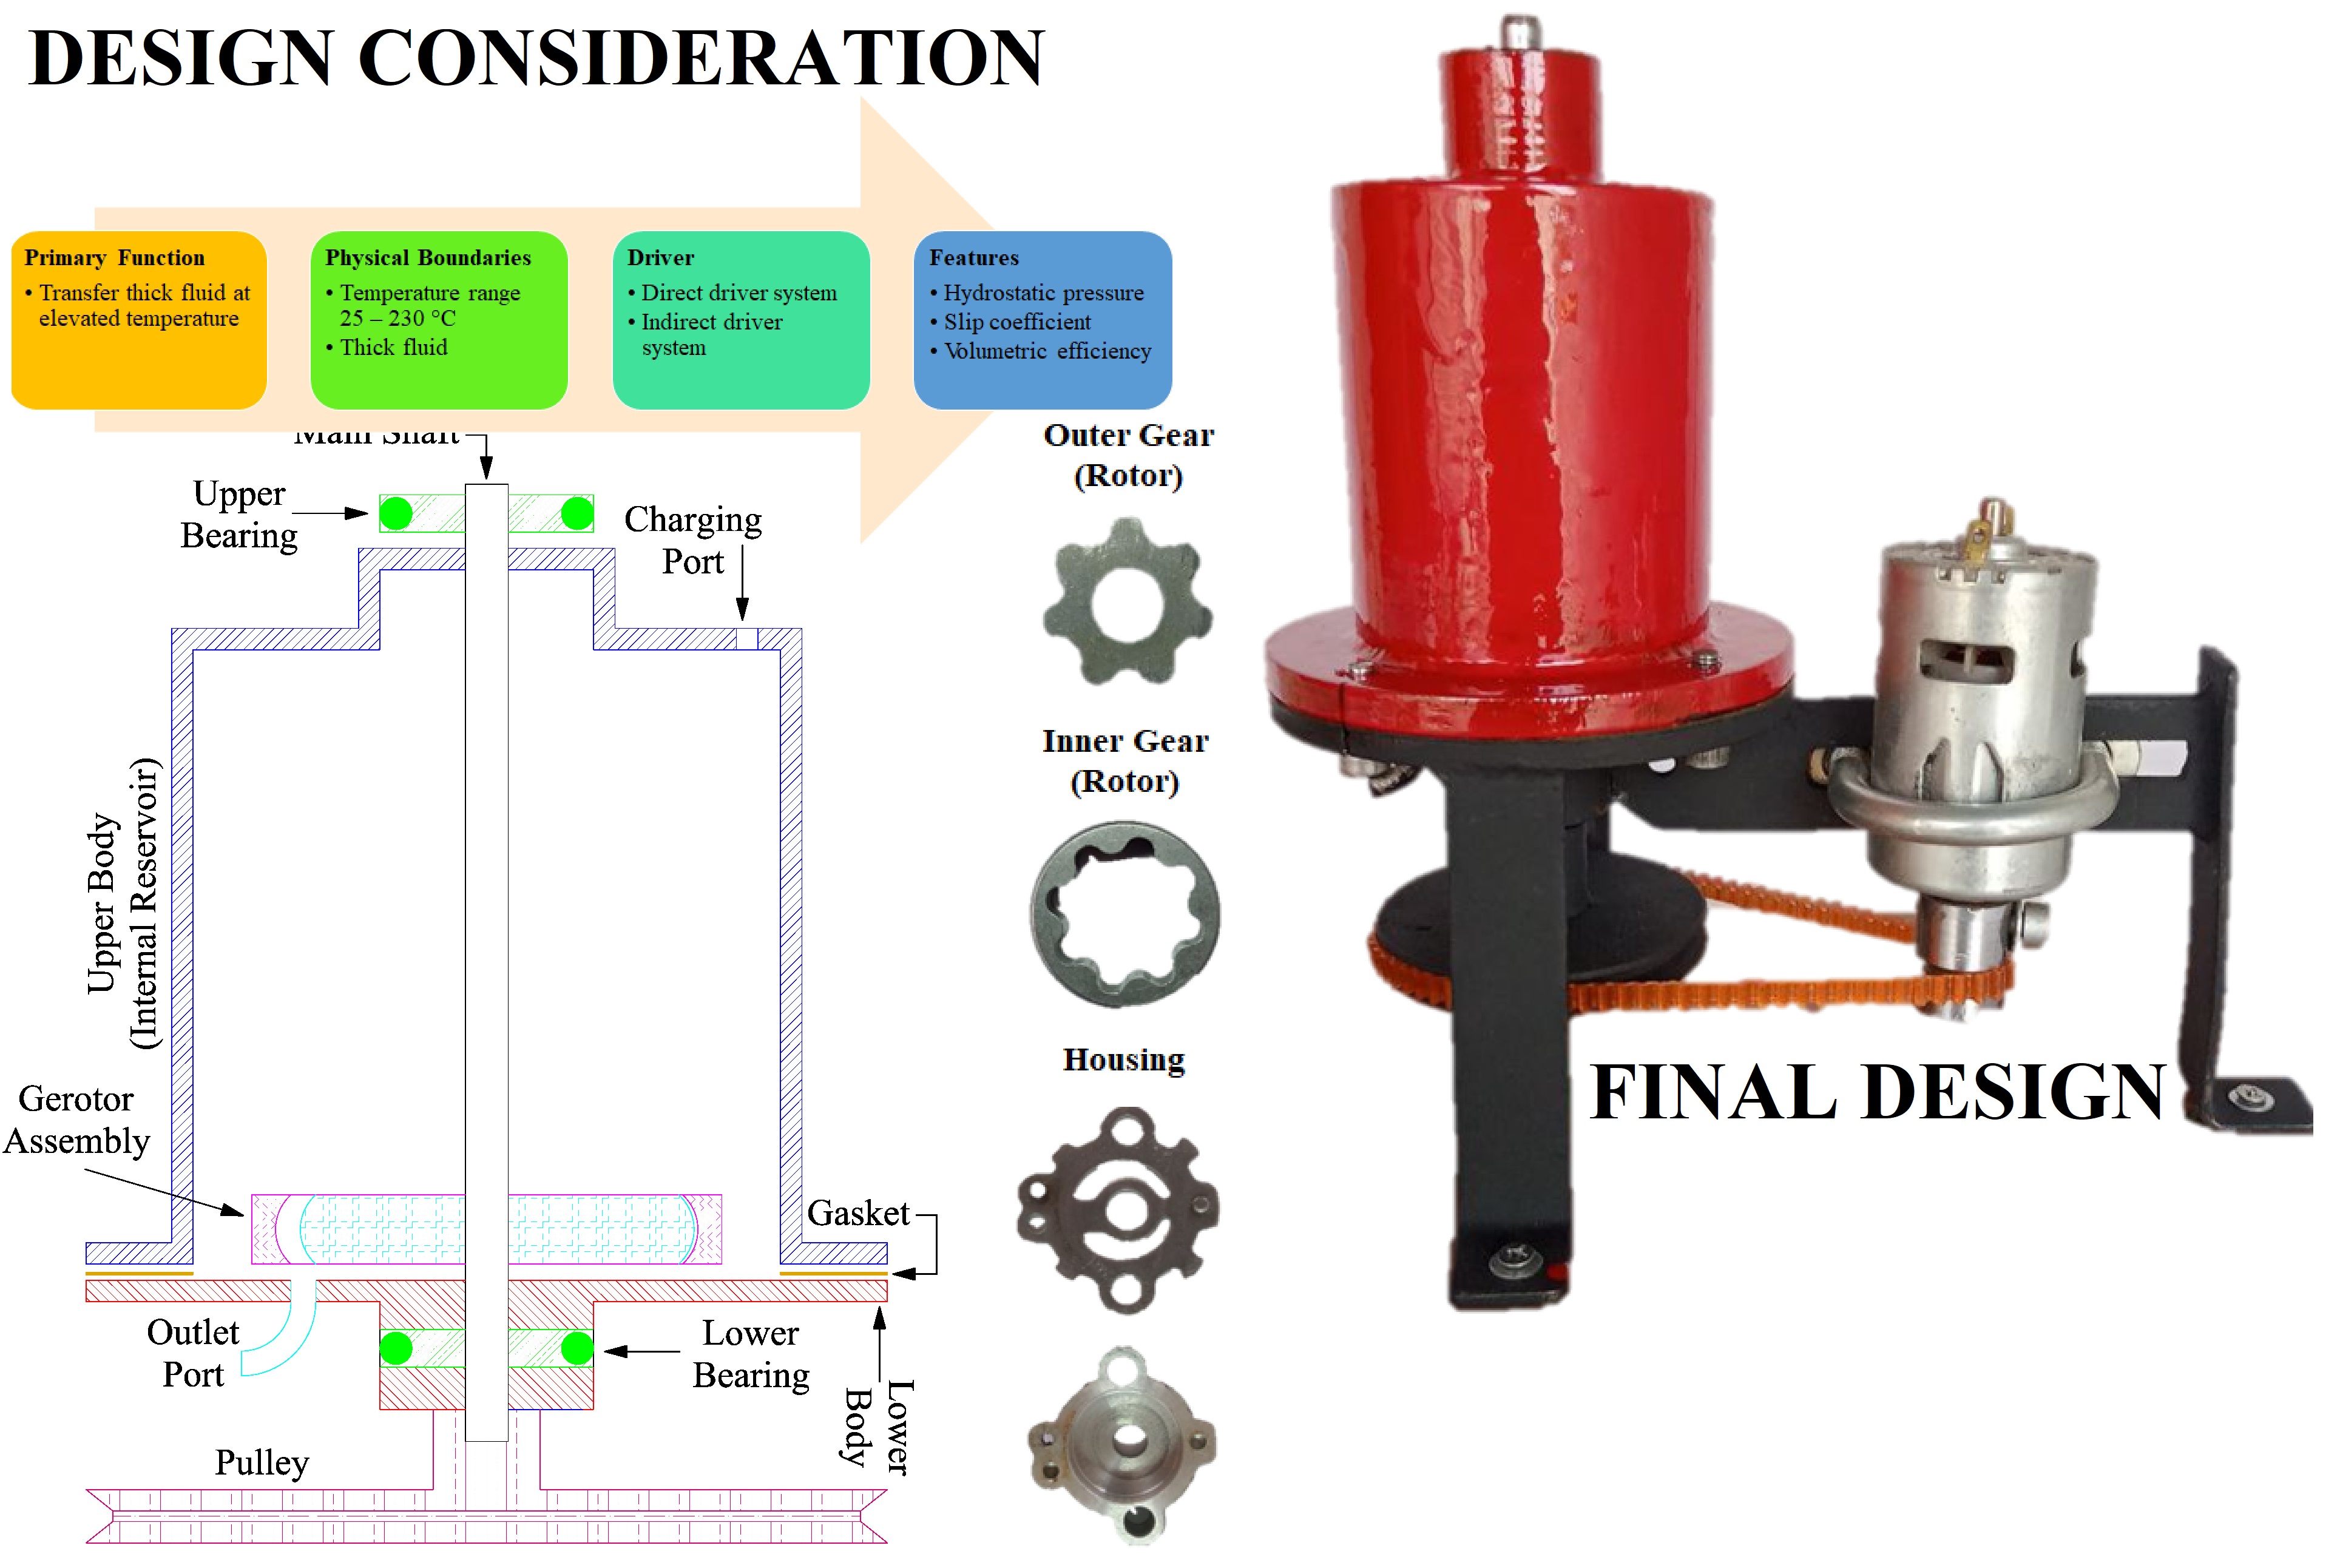 Advanced design of a small-scale mini gerotor pump in a high-temperature and high-viscosity fluid thermal system